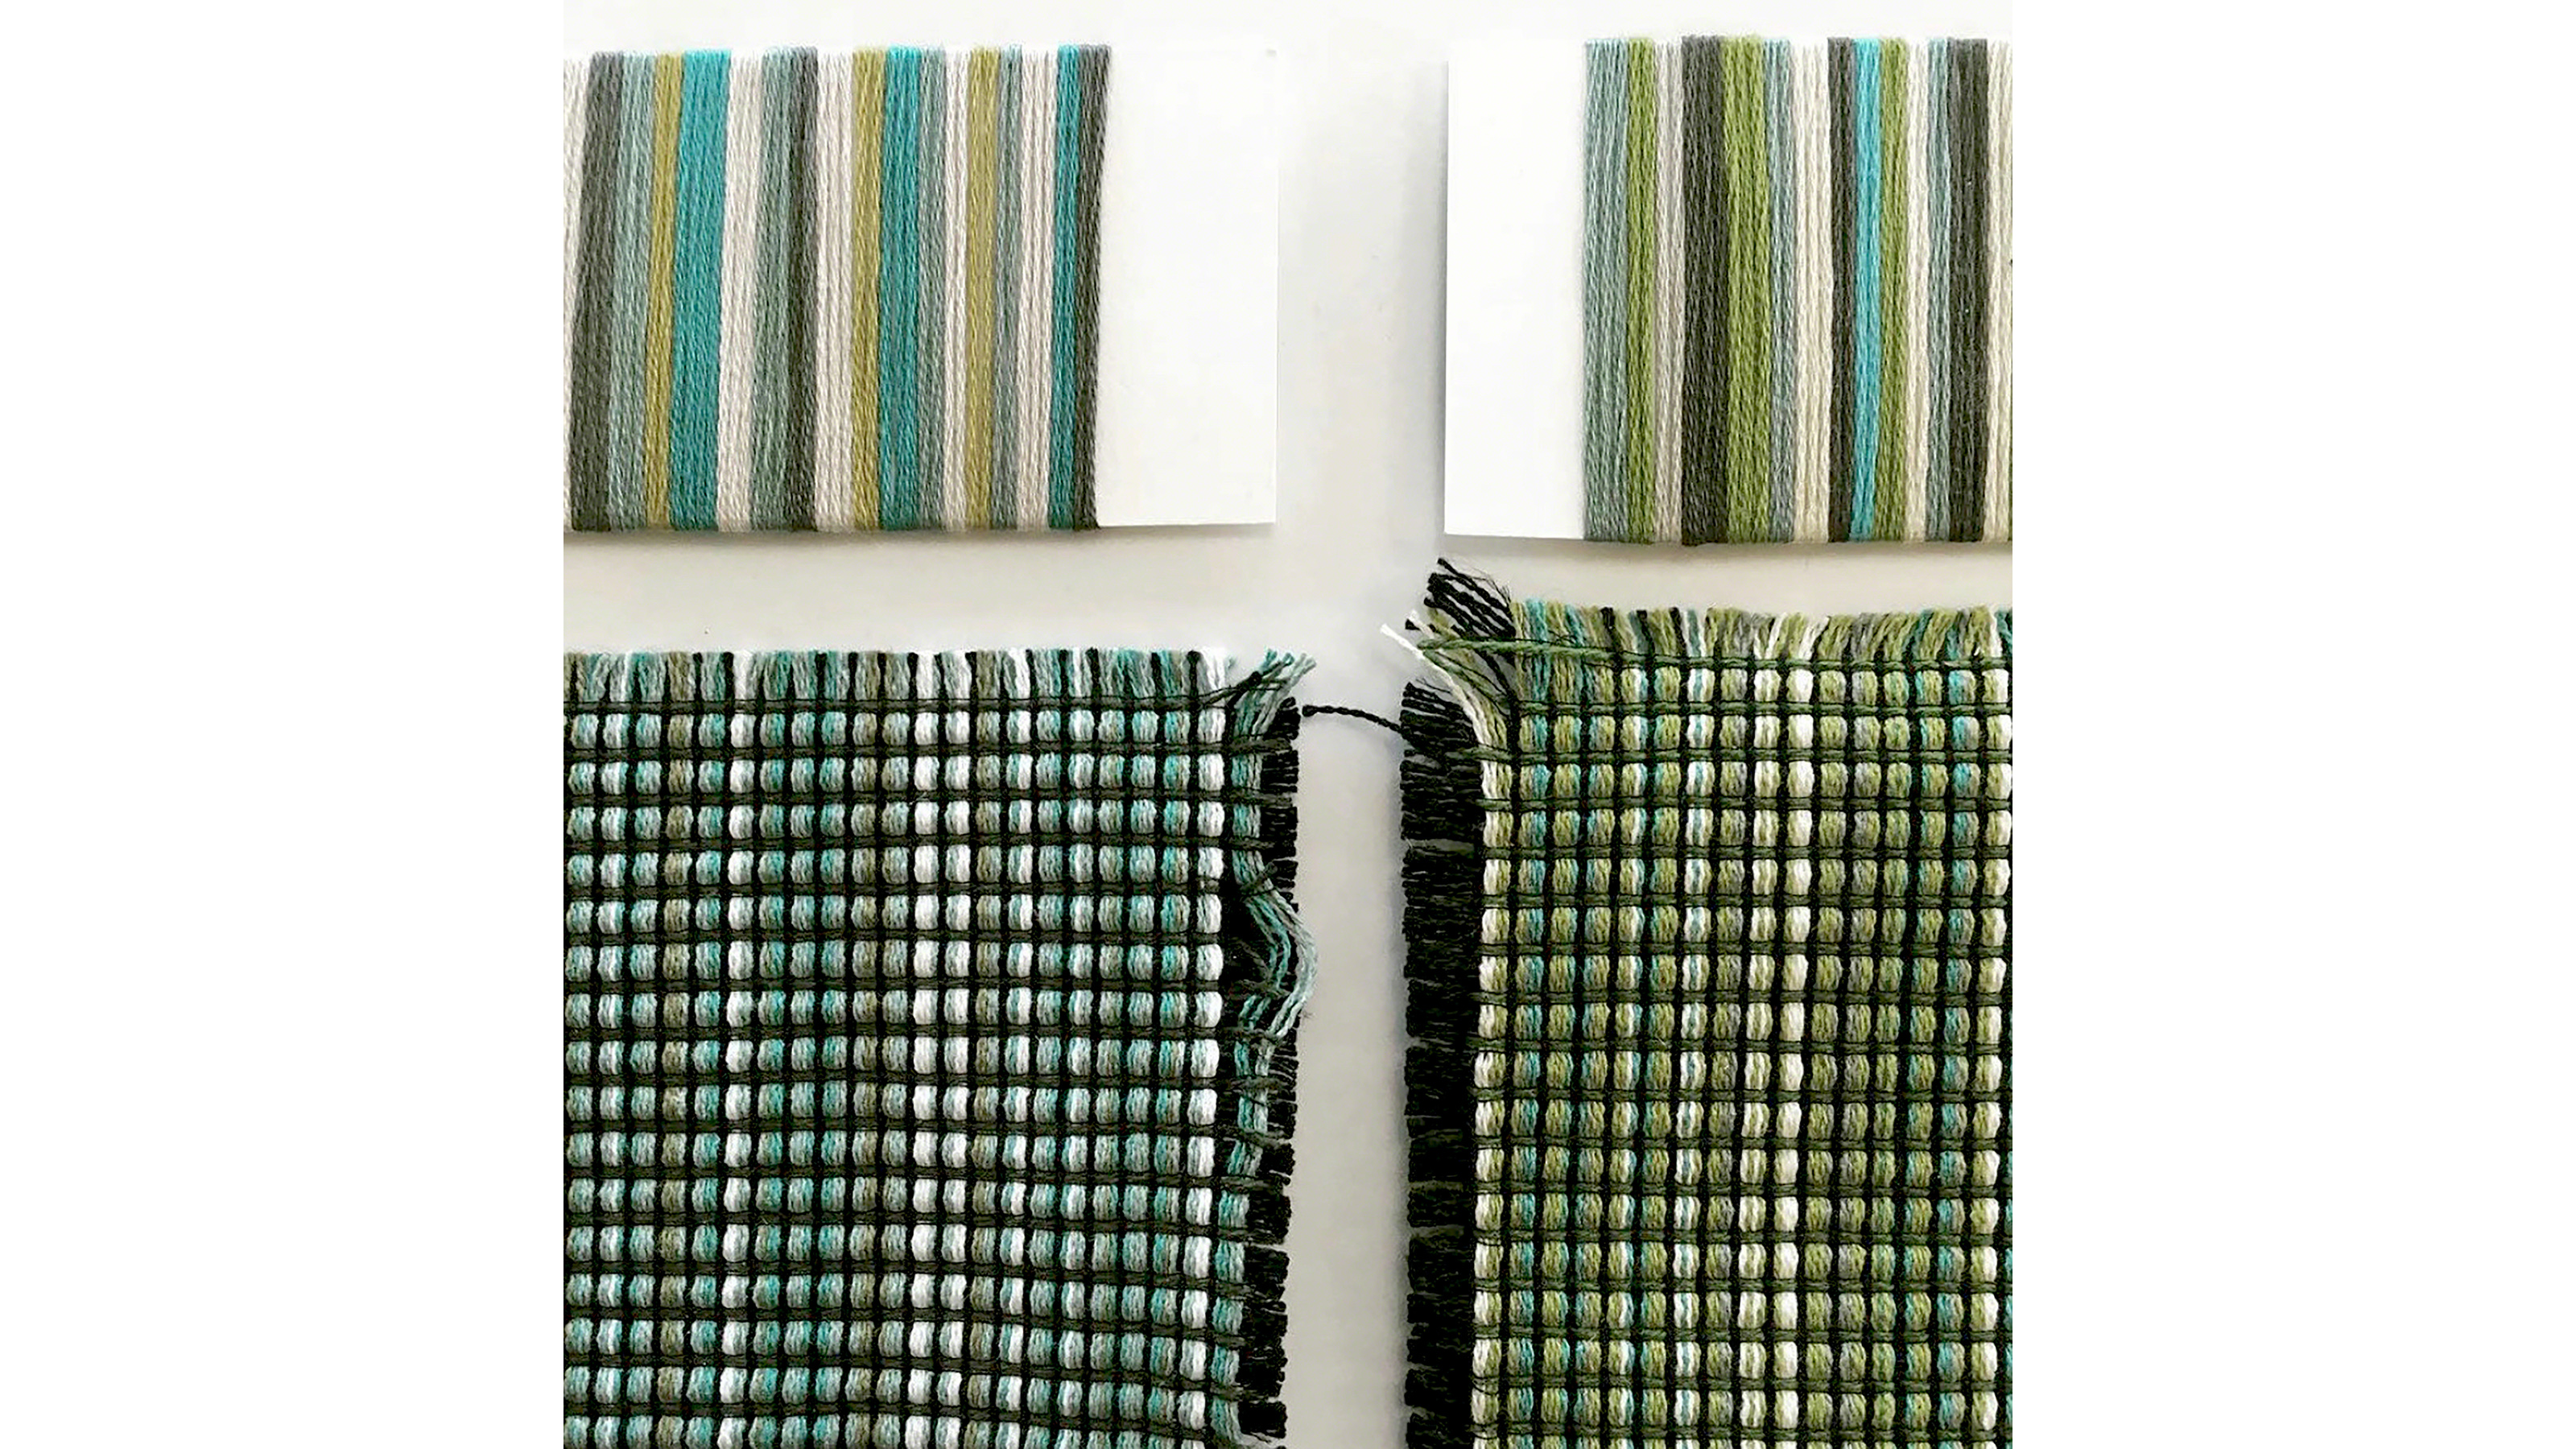 detail shot of thread and final woven material